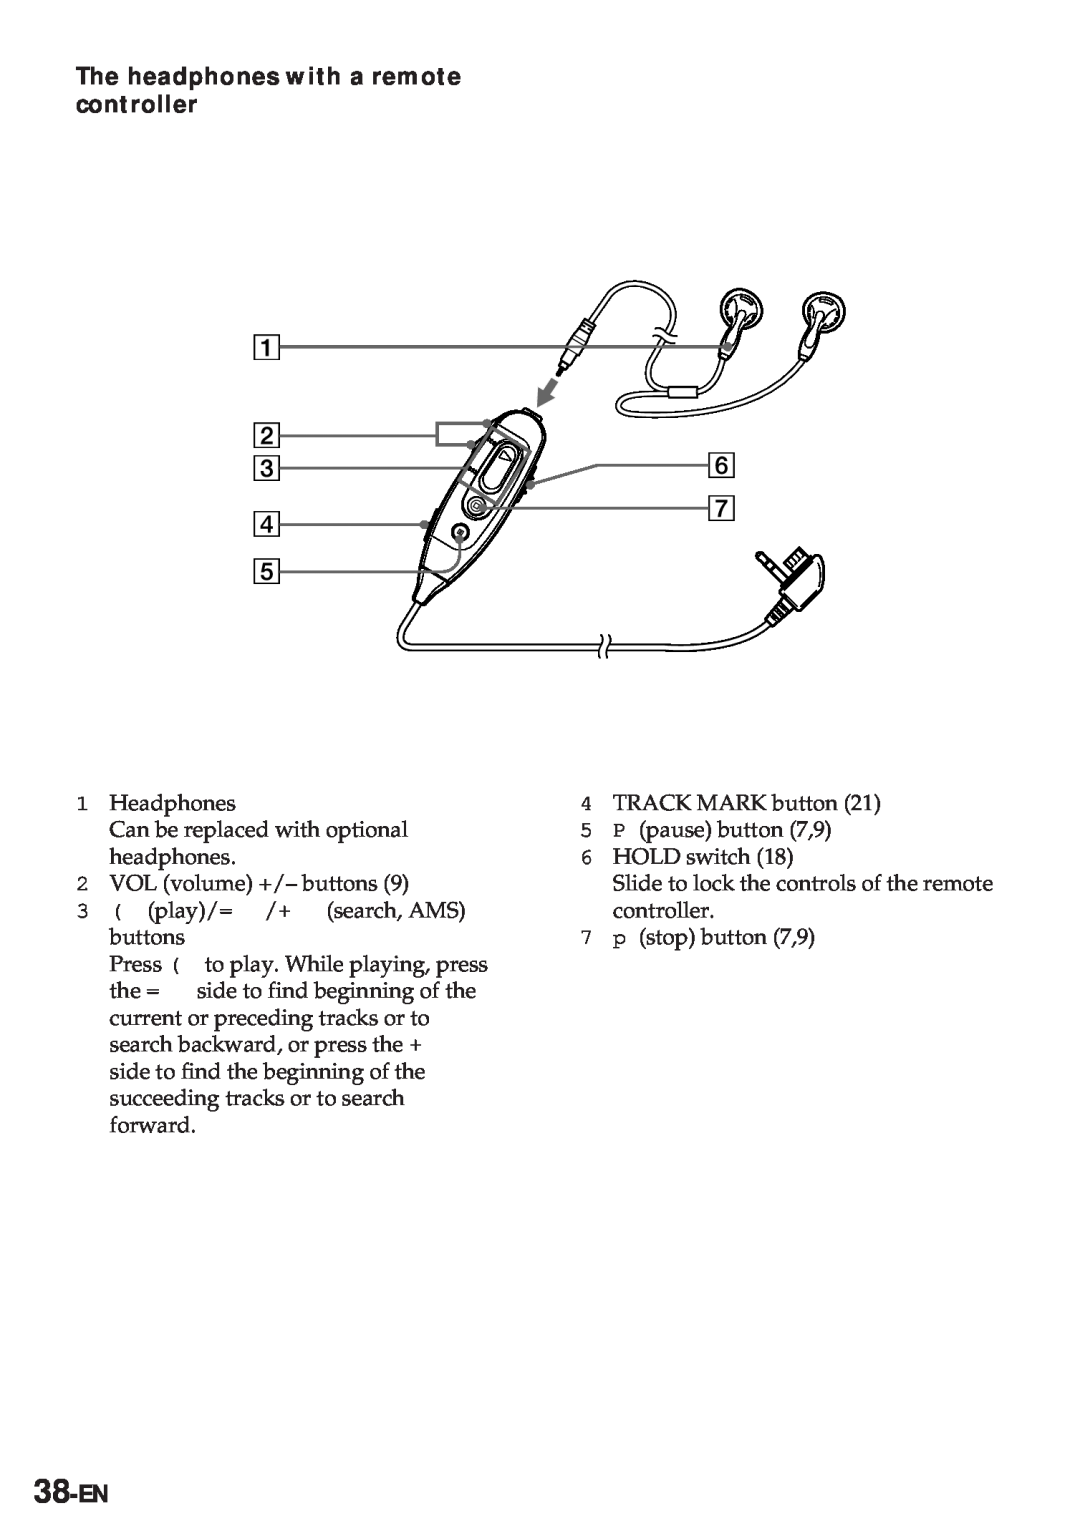 Sony MZ-R30 operating instructions The headphones with a remote controller, 38-EN 